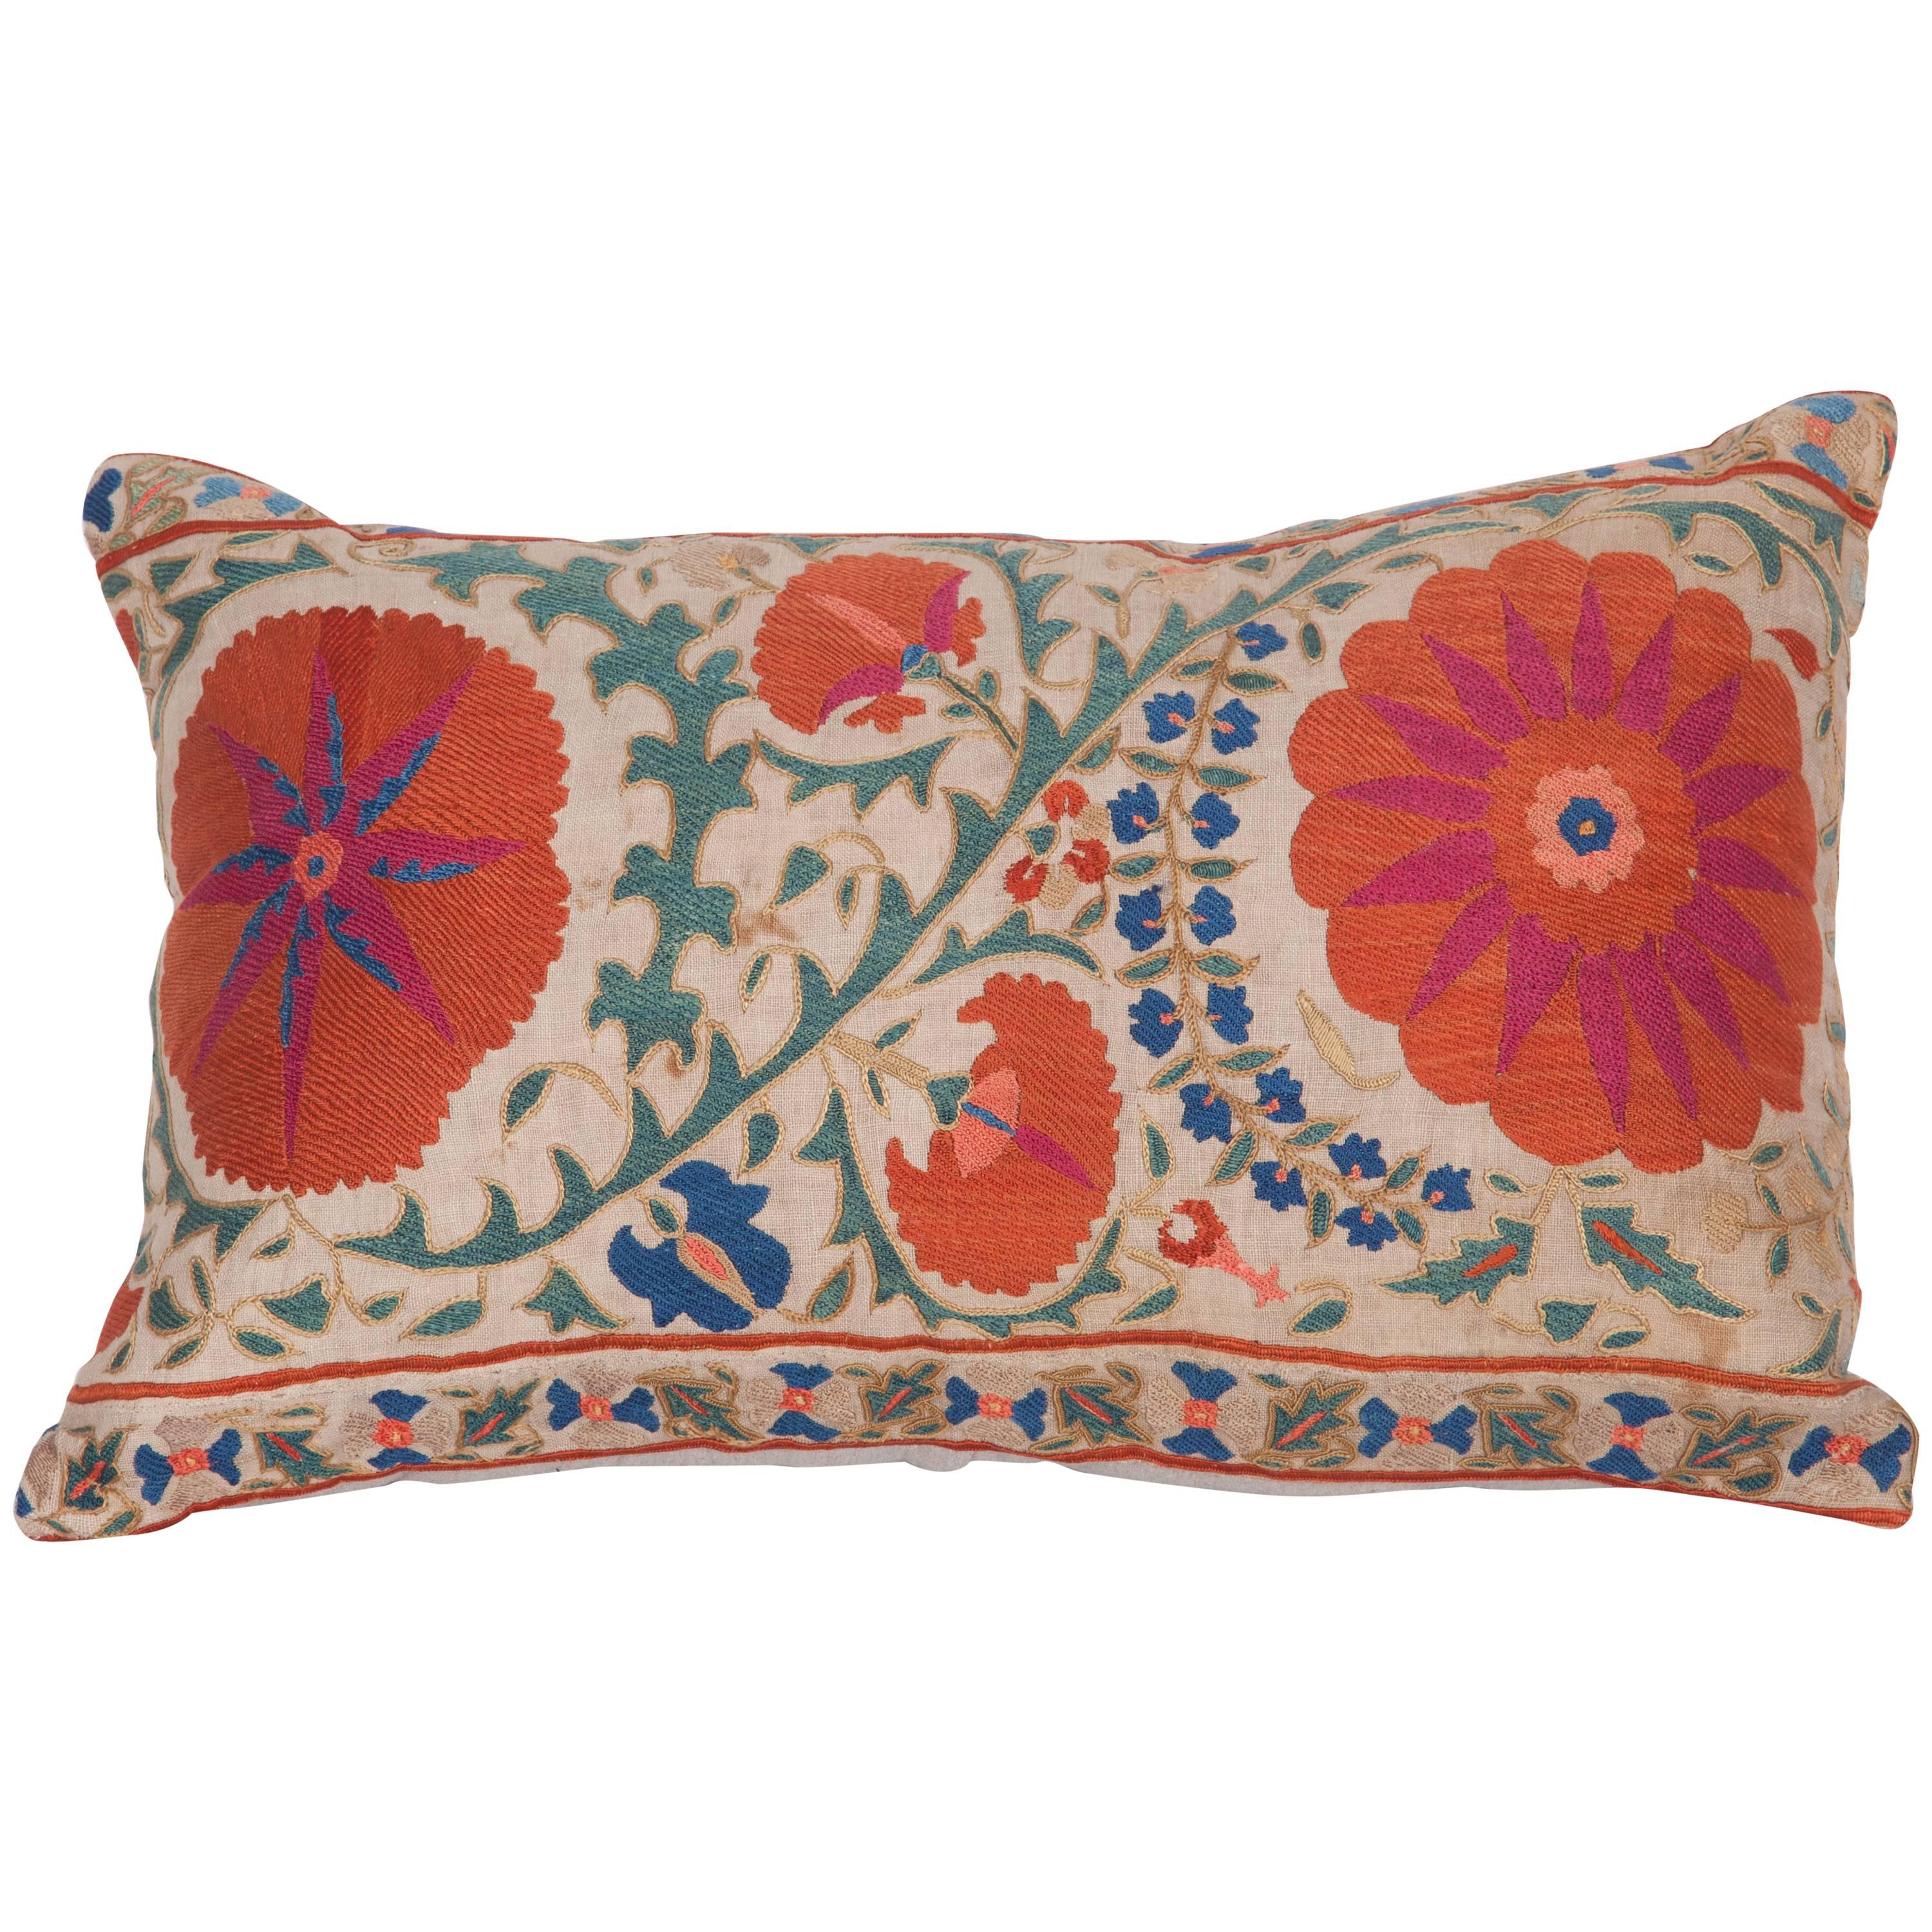 Antique Pillow Made Out of a Mid-19th Century, Uzbek Bukhara Suzani